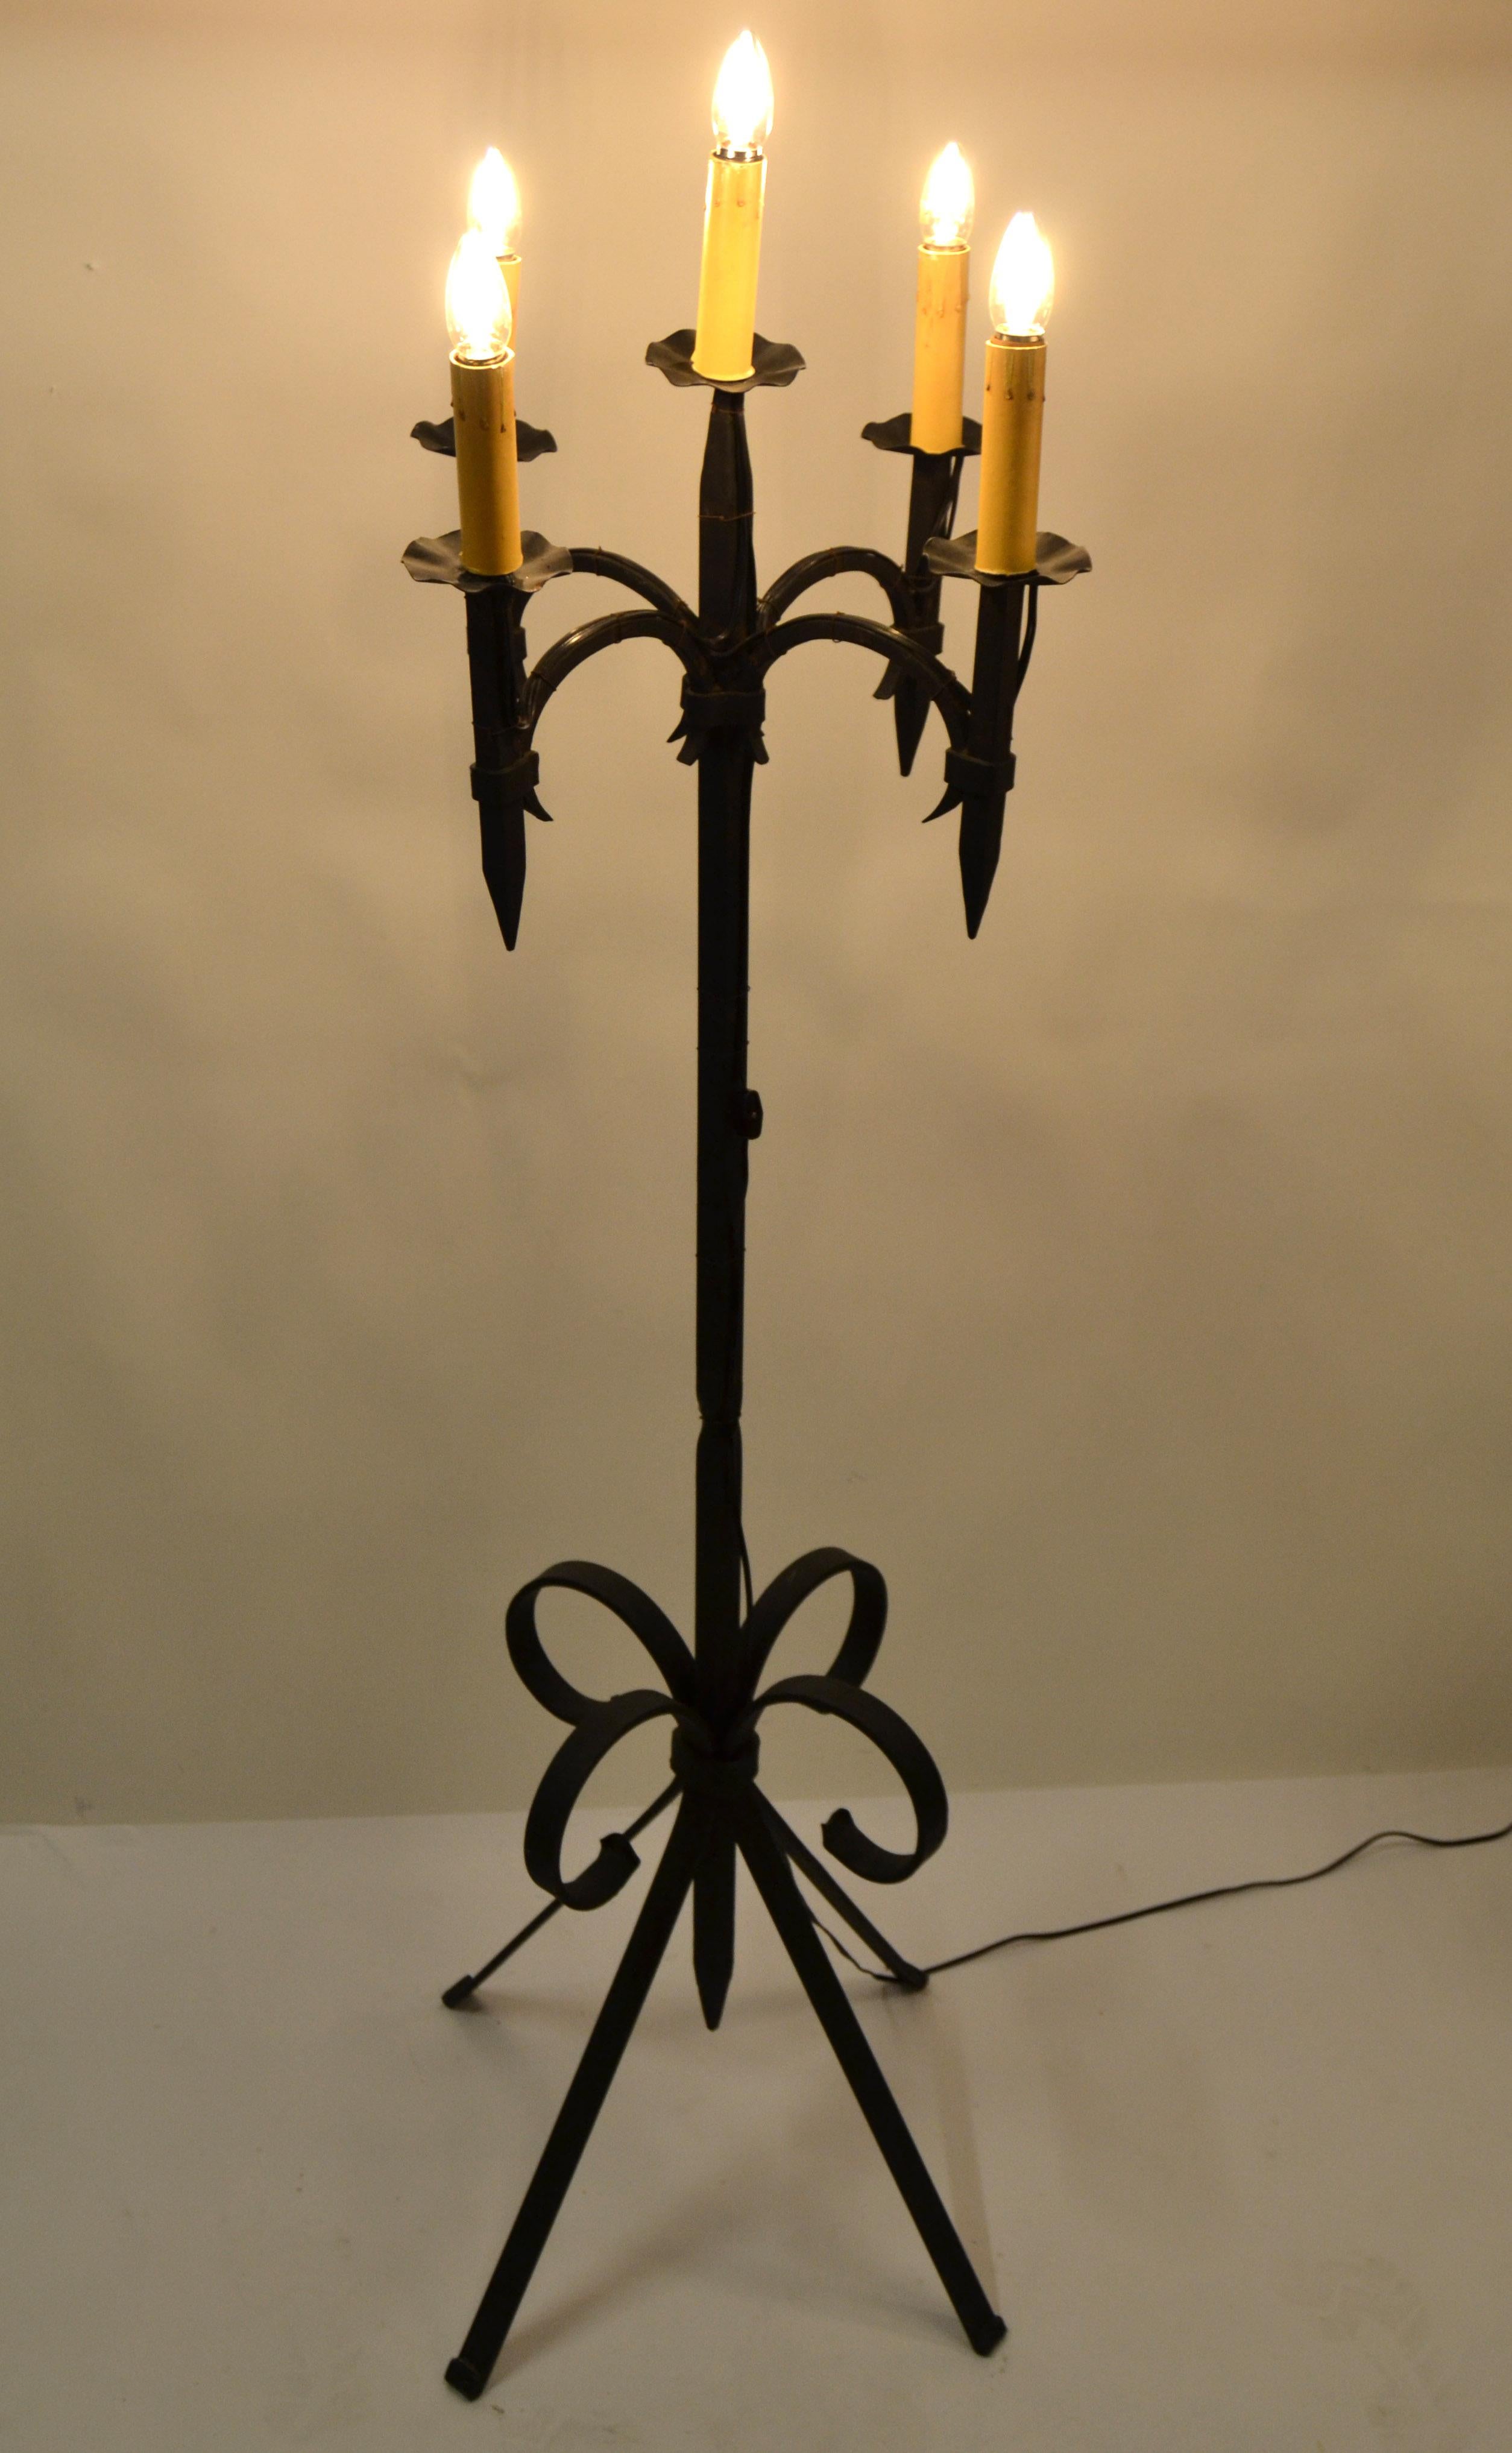 Early 20th Century French Forged Wrought Iron 5 Light Candelabra Floor Lamp In Good Condition For Sale In Miami, FL